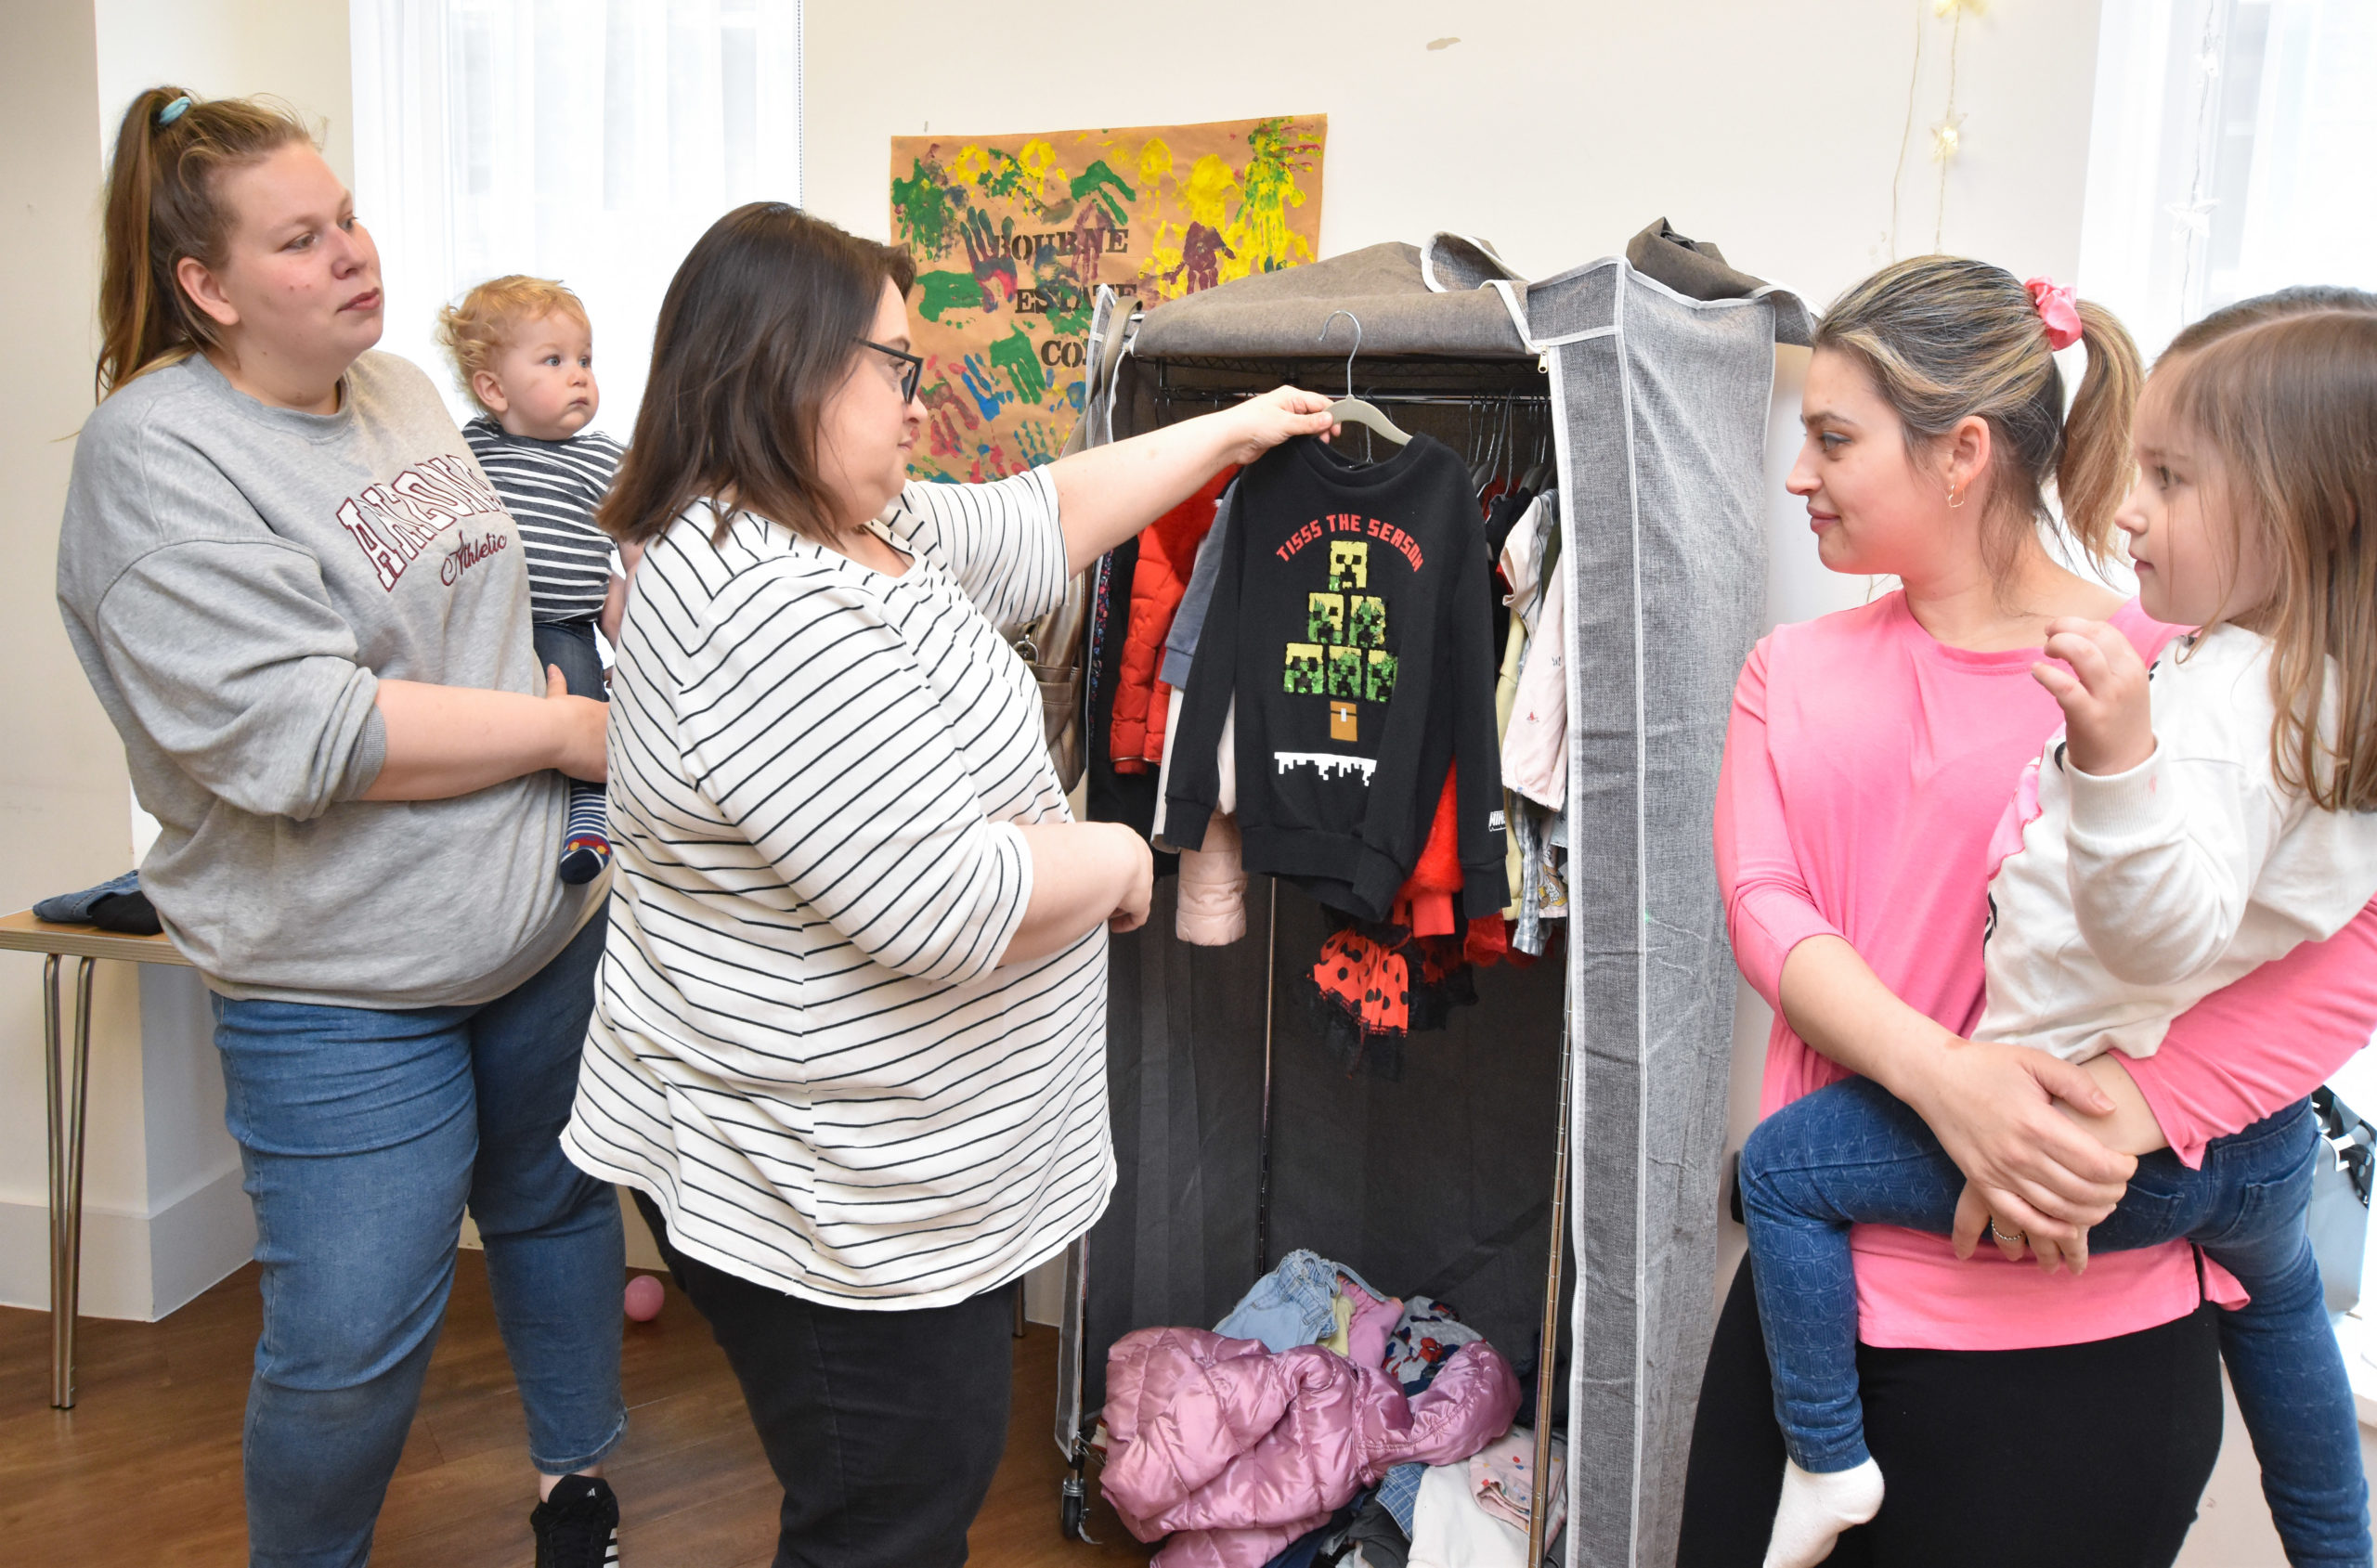 Mel, two mums and their children look through the clothes in the 'Narnia' wardrobe